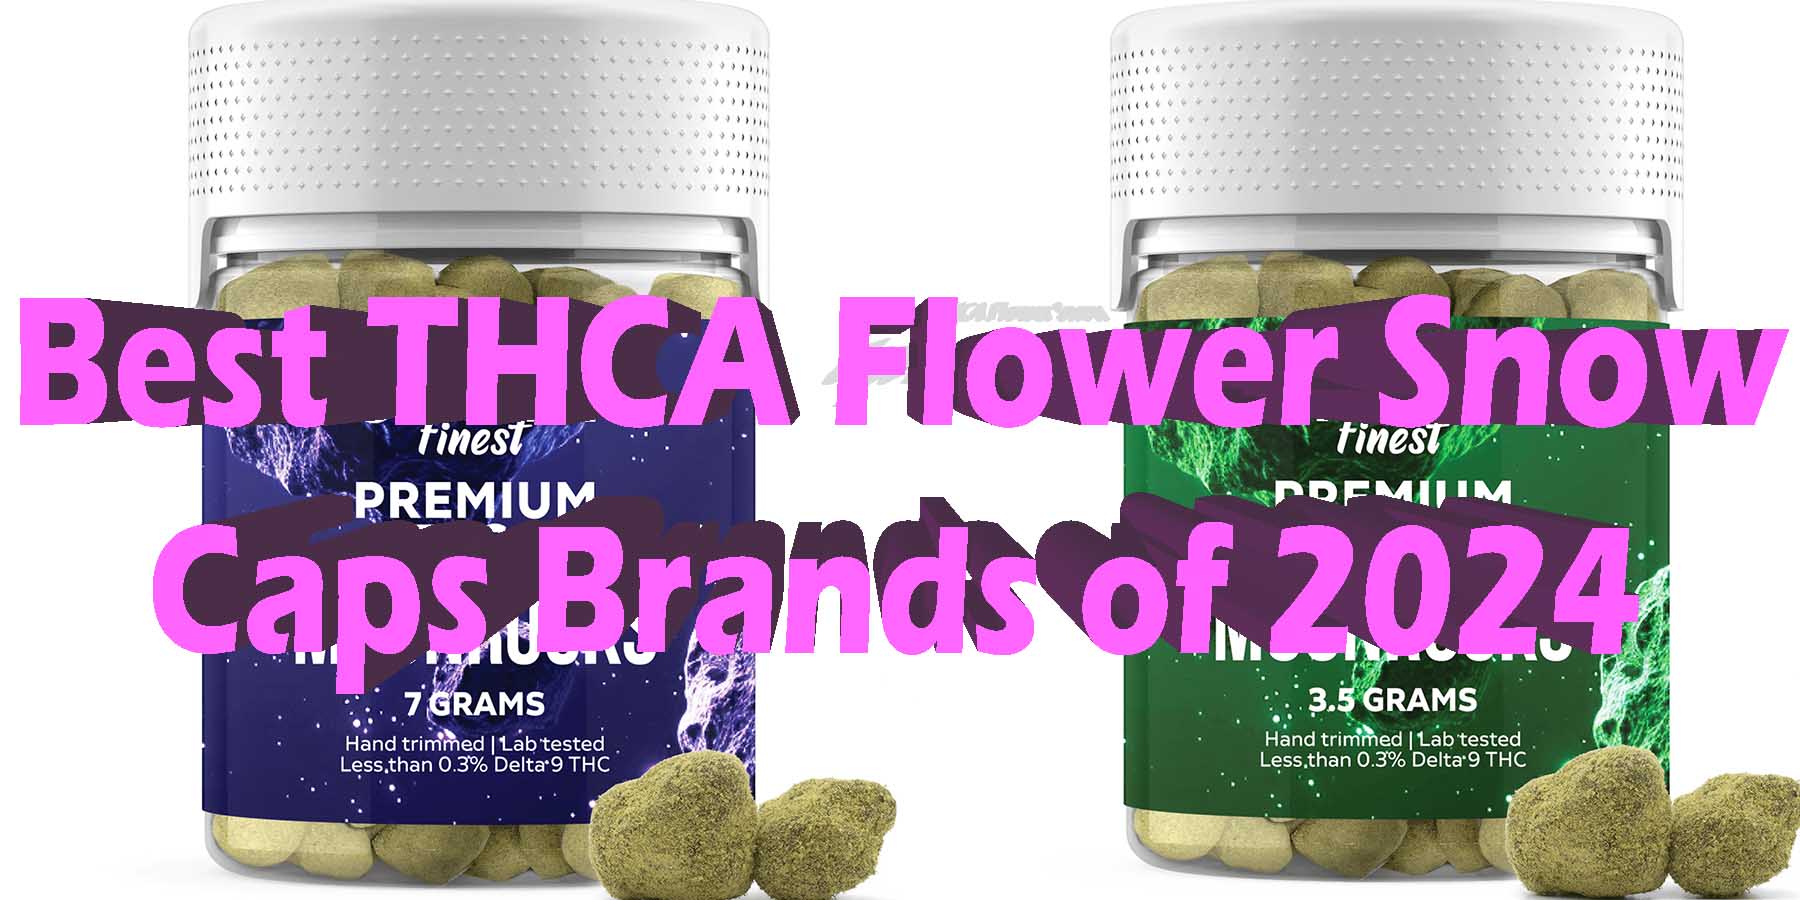 Best THCA Flower Snow Caps Brands of 2024 Coupon Discount For Smoking Best High Smoke THCA THC Cannabinoids Shop Online Near Me Bloomz